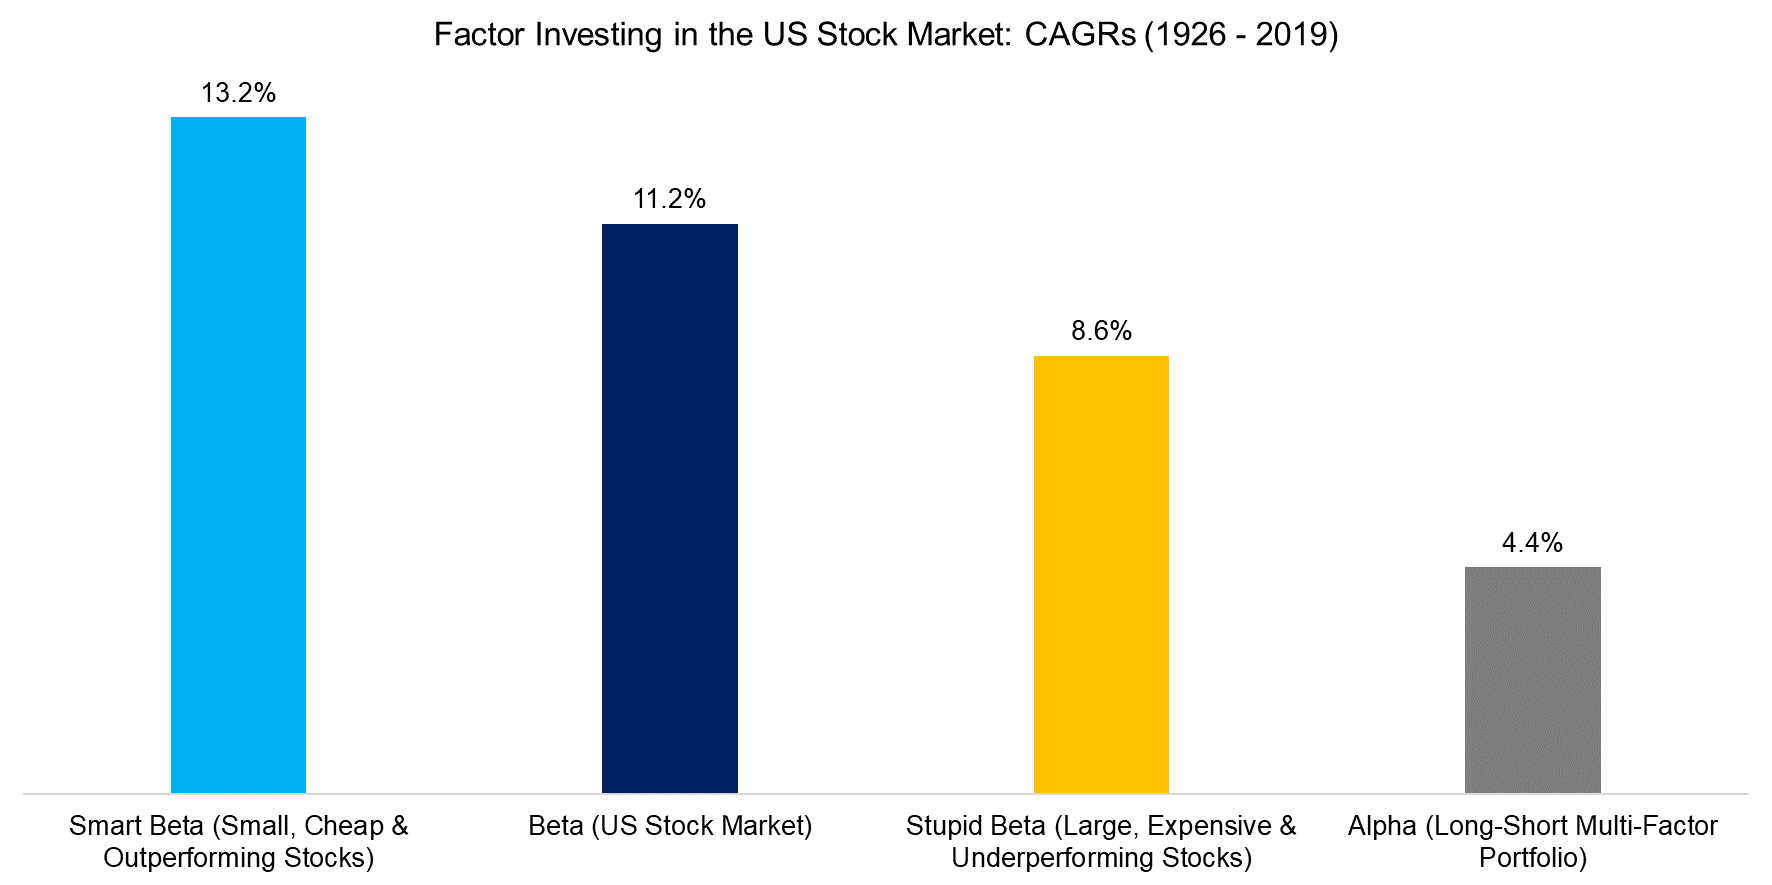 Factor Investing in the US Stock Market CAGRs (1926 - 2019)